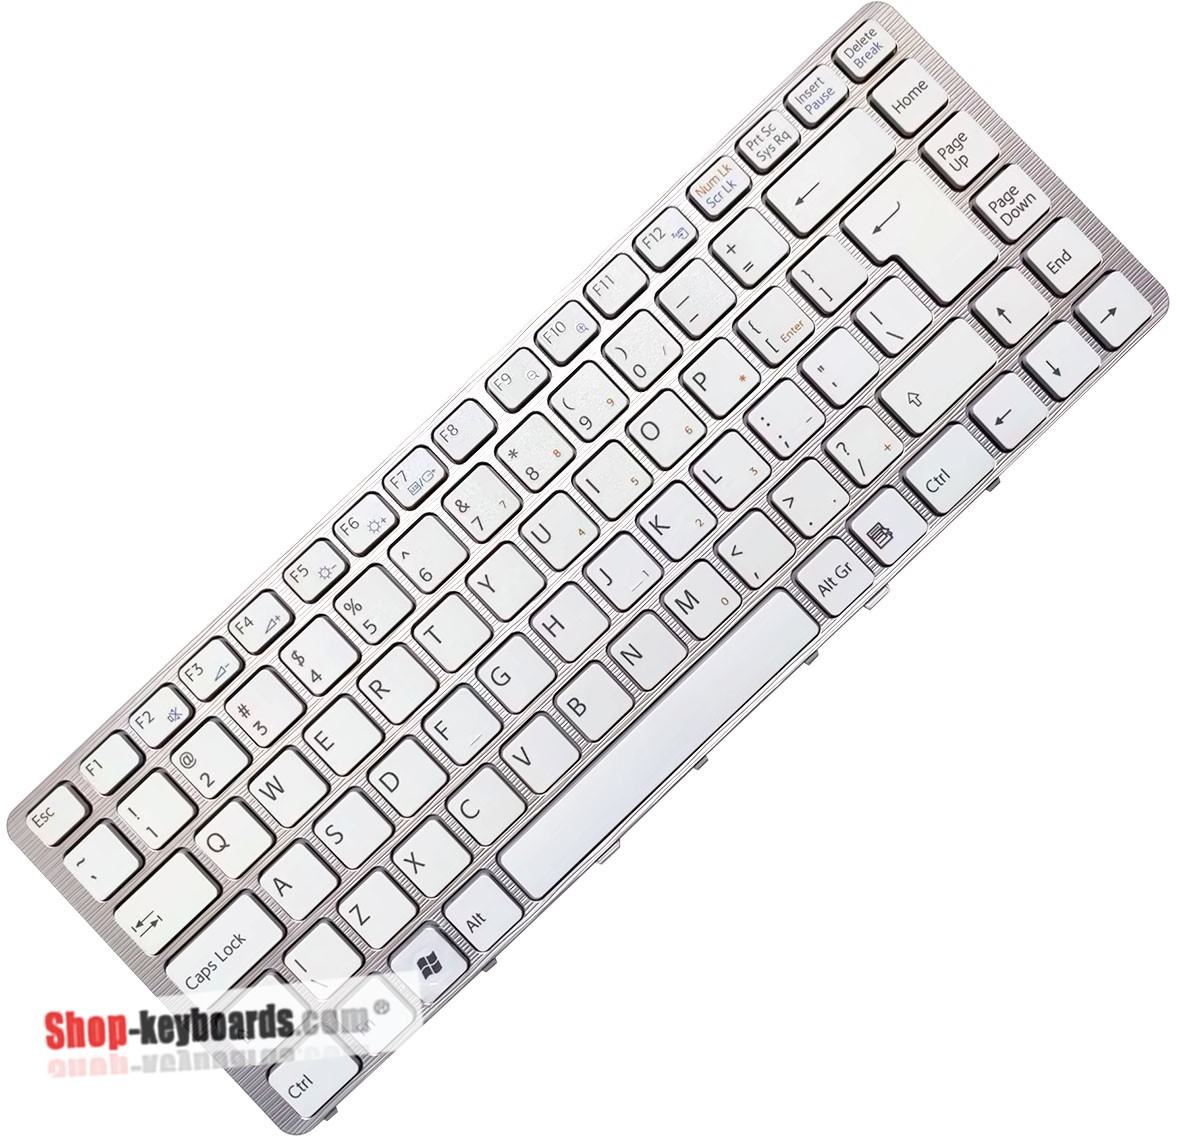 Sony VAIO VGN-NW71FB/N  Keyboard replacement